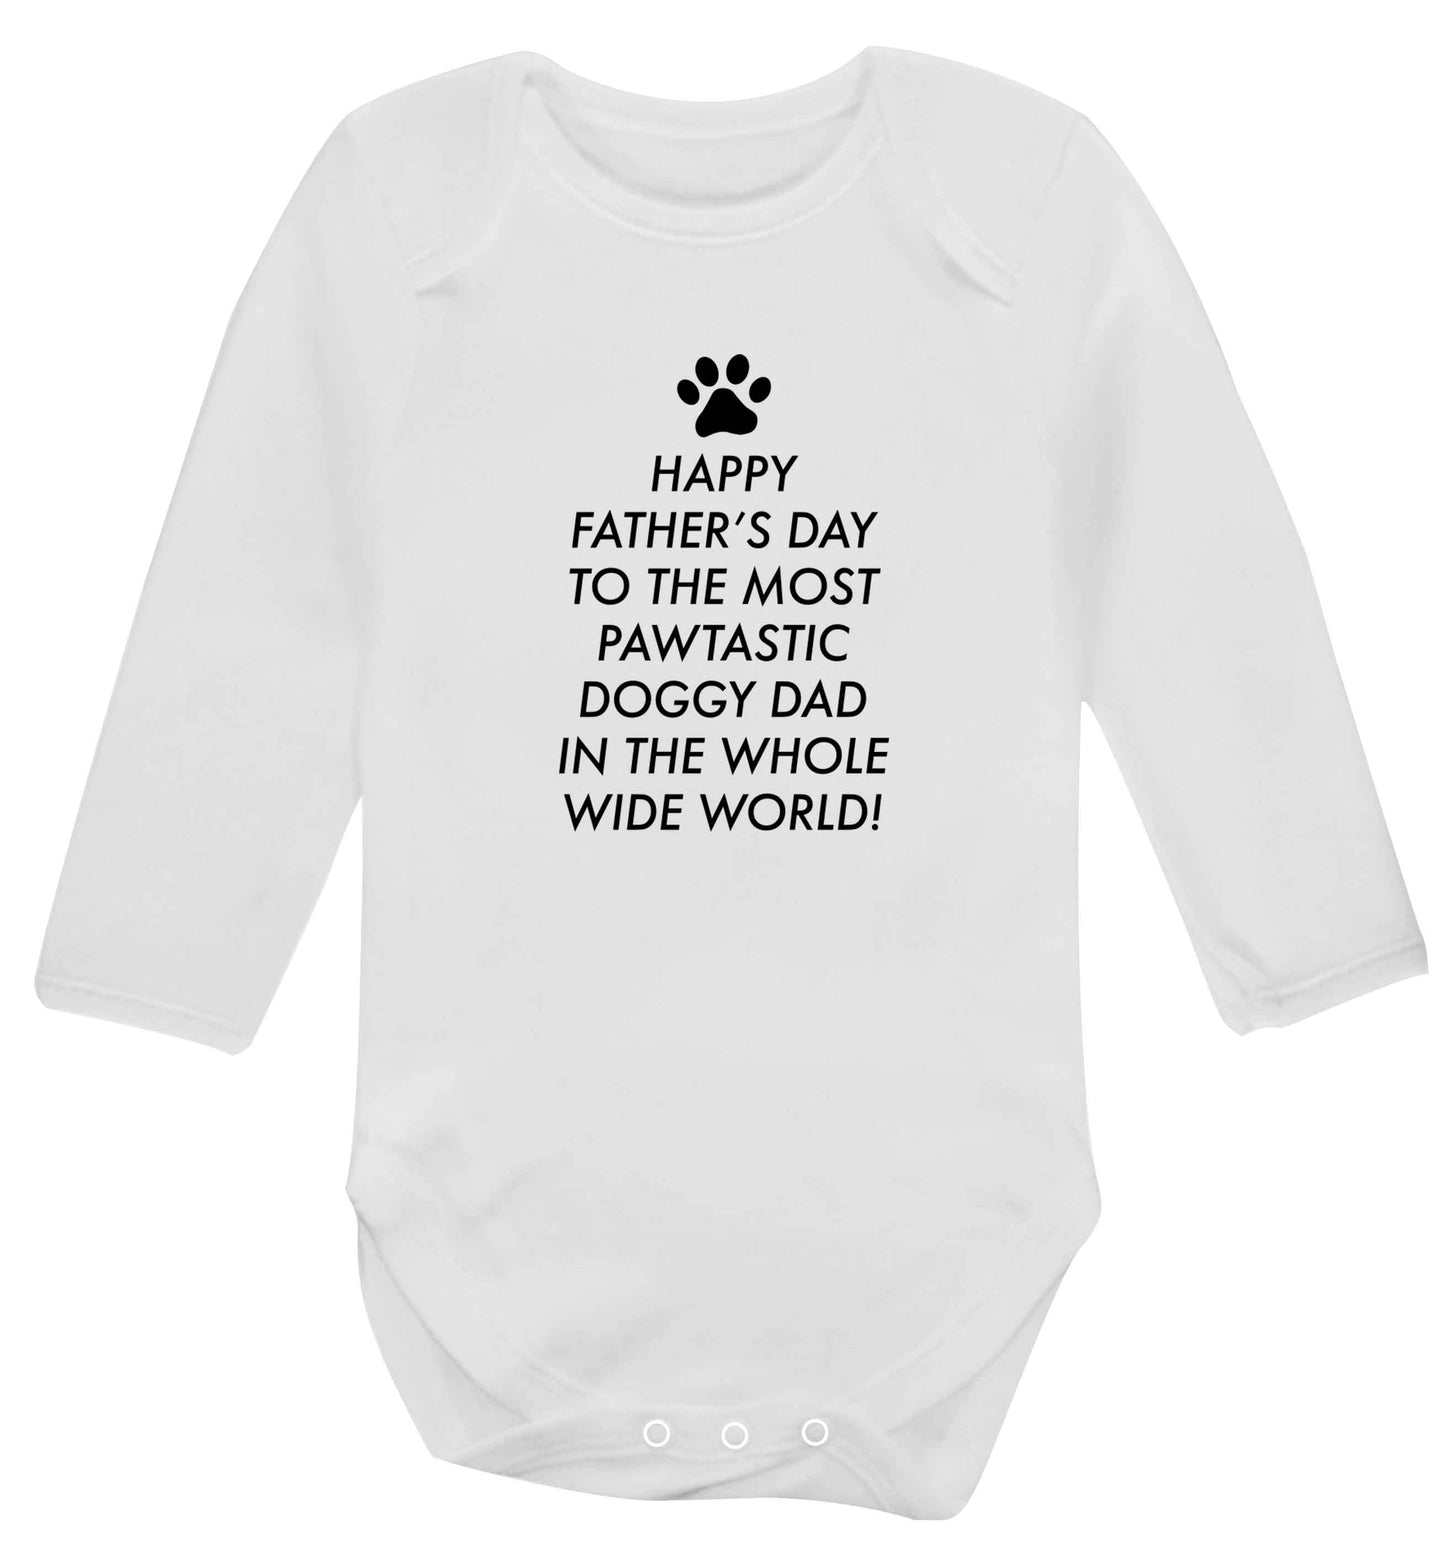 Happy Father's day to the most pawtastic doggy dad in the whole wide world!baby vest long sleeved white 6-12 months